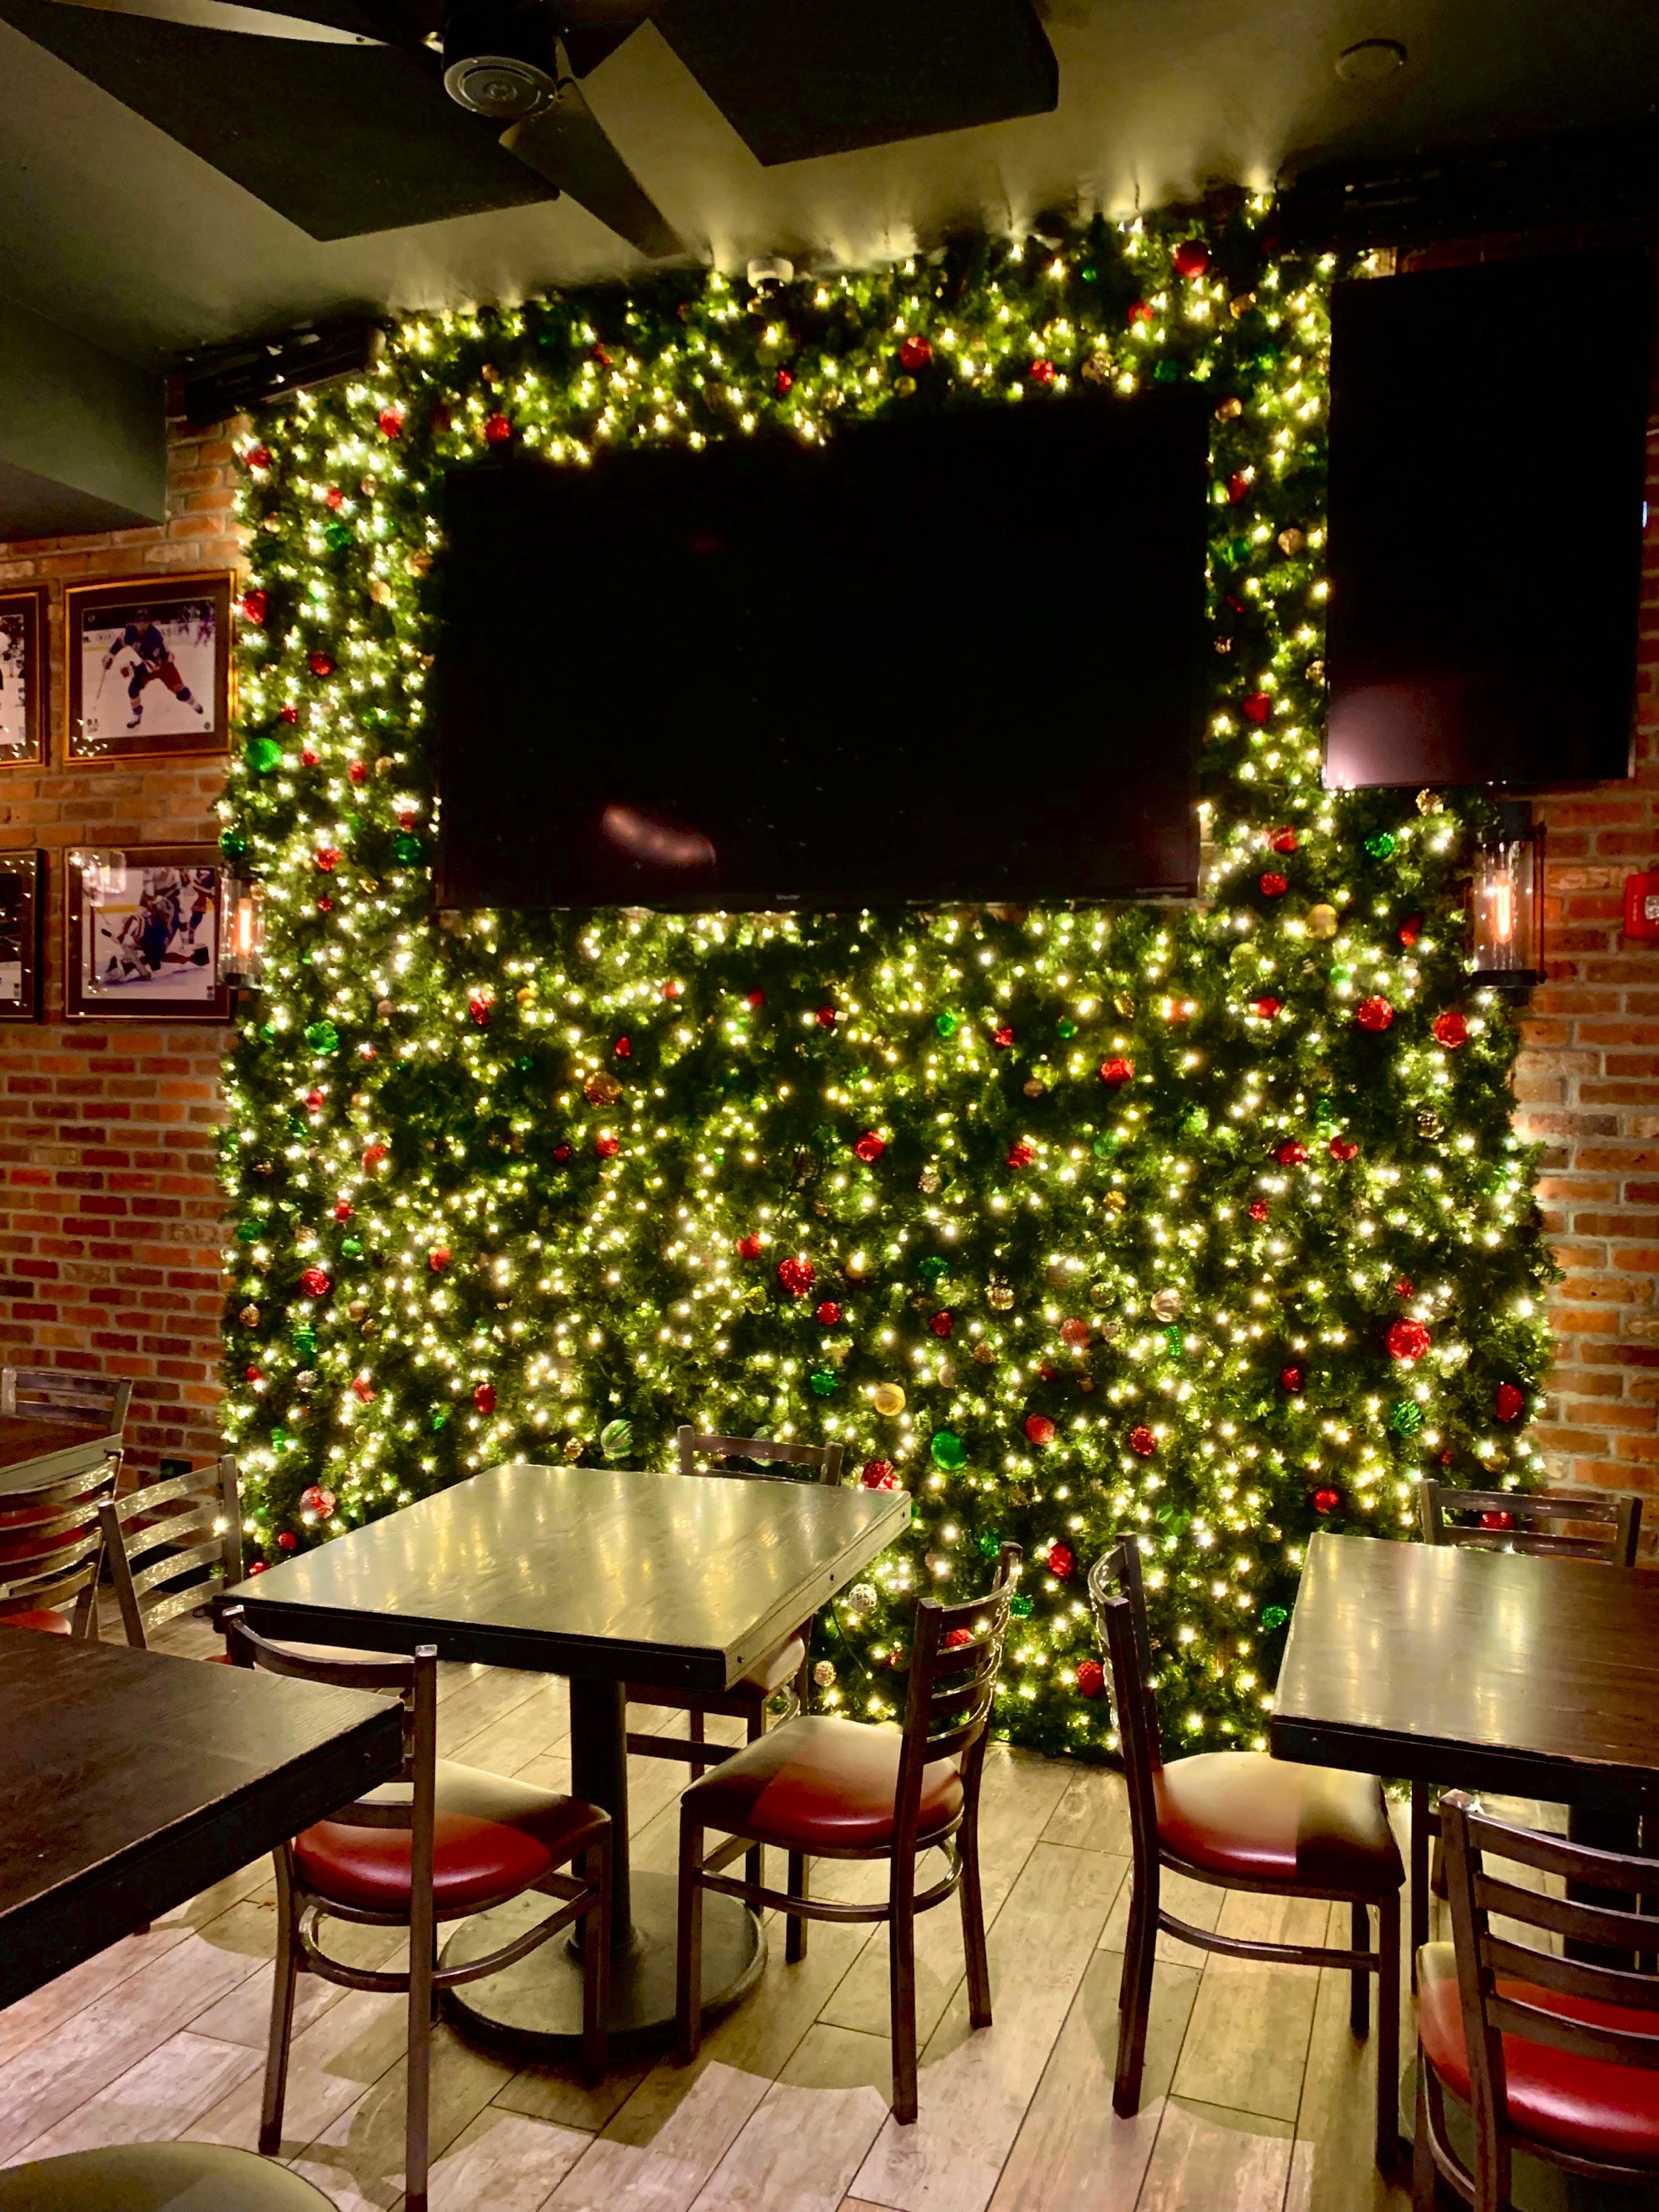 Decorated greenery wall in a restaurant